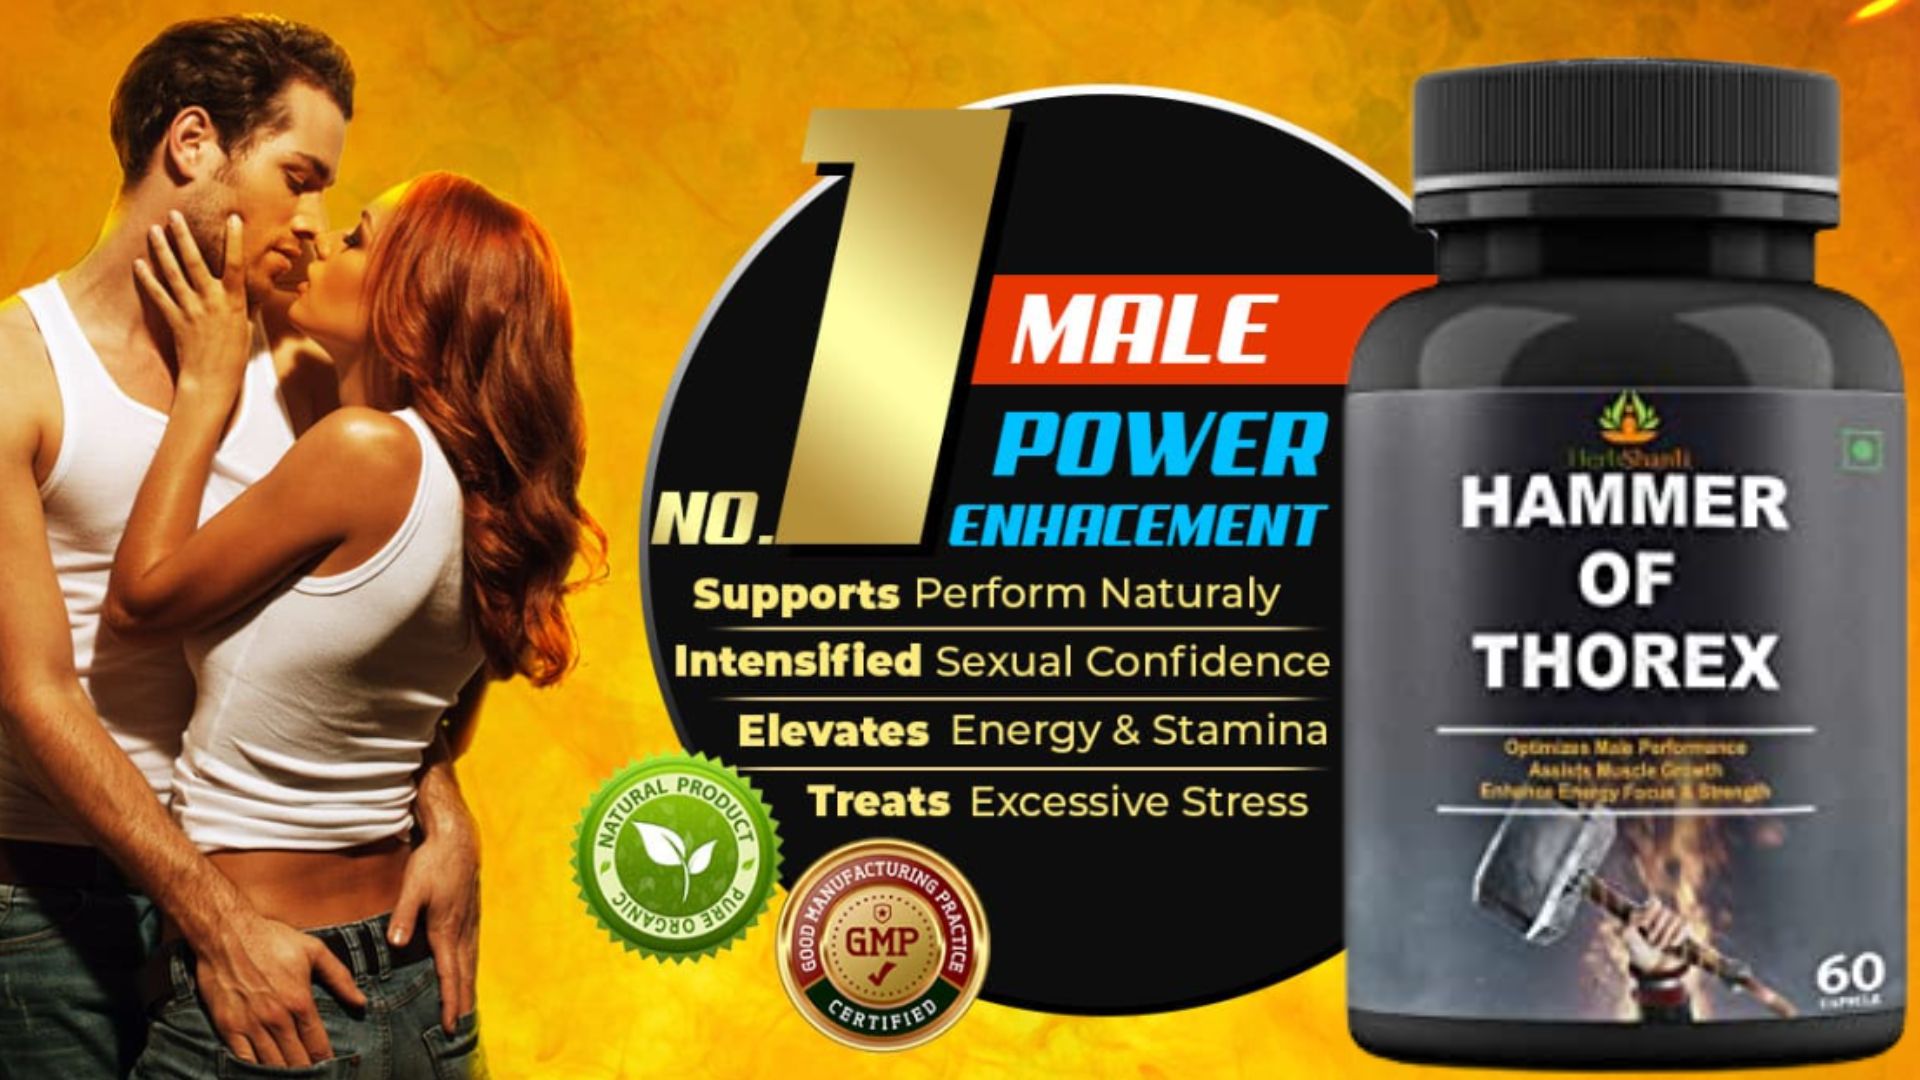 Hammer of thorex – Benefits, Side-Effects Price in India! Order